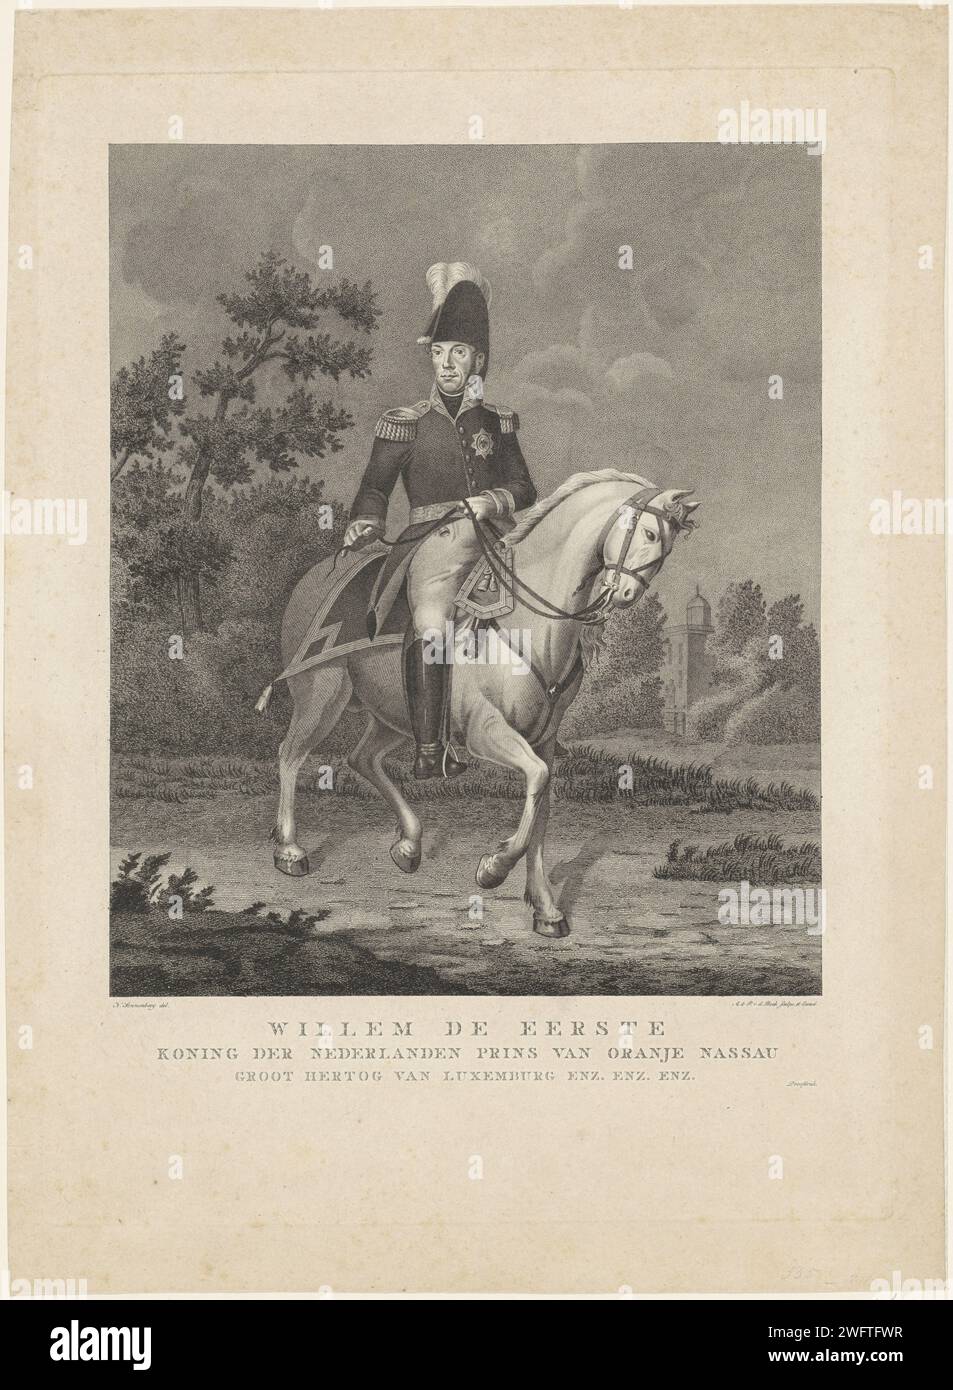 Bridle portrait of Willem I Frederik, King of the Netherlands, Antonie and Pieter van der Beek, after Nicolaas Sonnenberg, 1815 - 1821 print Equestrian portrait of Willem I Frederik. There are name and titles in the lower margin. 'Proef pressure. Amsterdam paper engraving / etching knighthood order (with NAME) - insignia of a knighthood order, e.g.: badge, chain (with NAME of order) Stock Photo